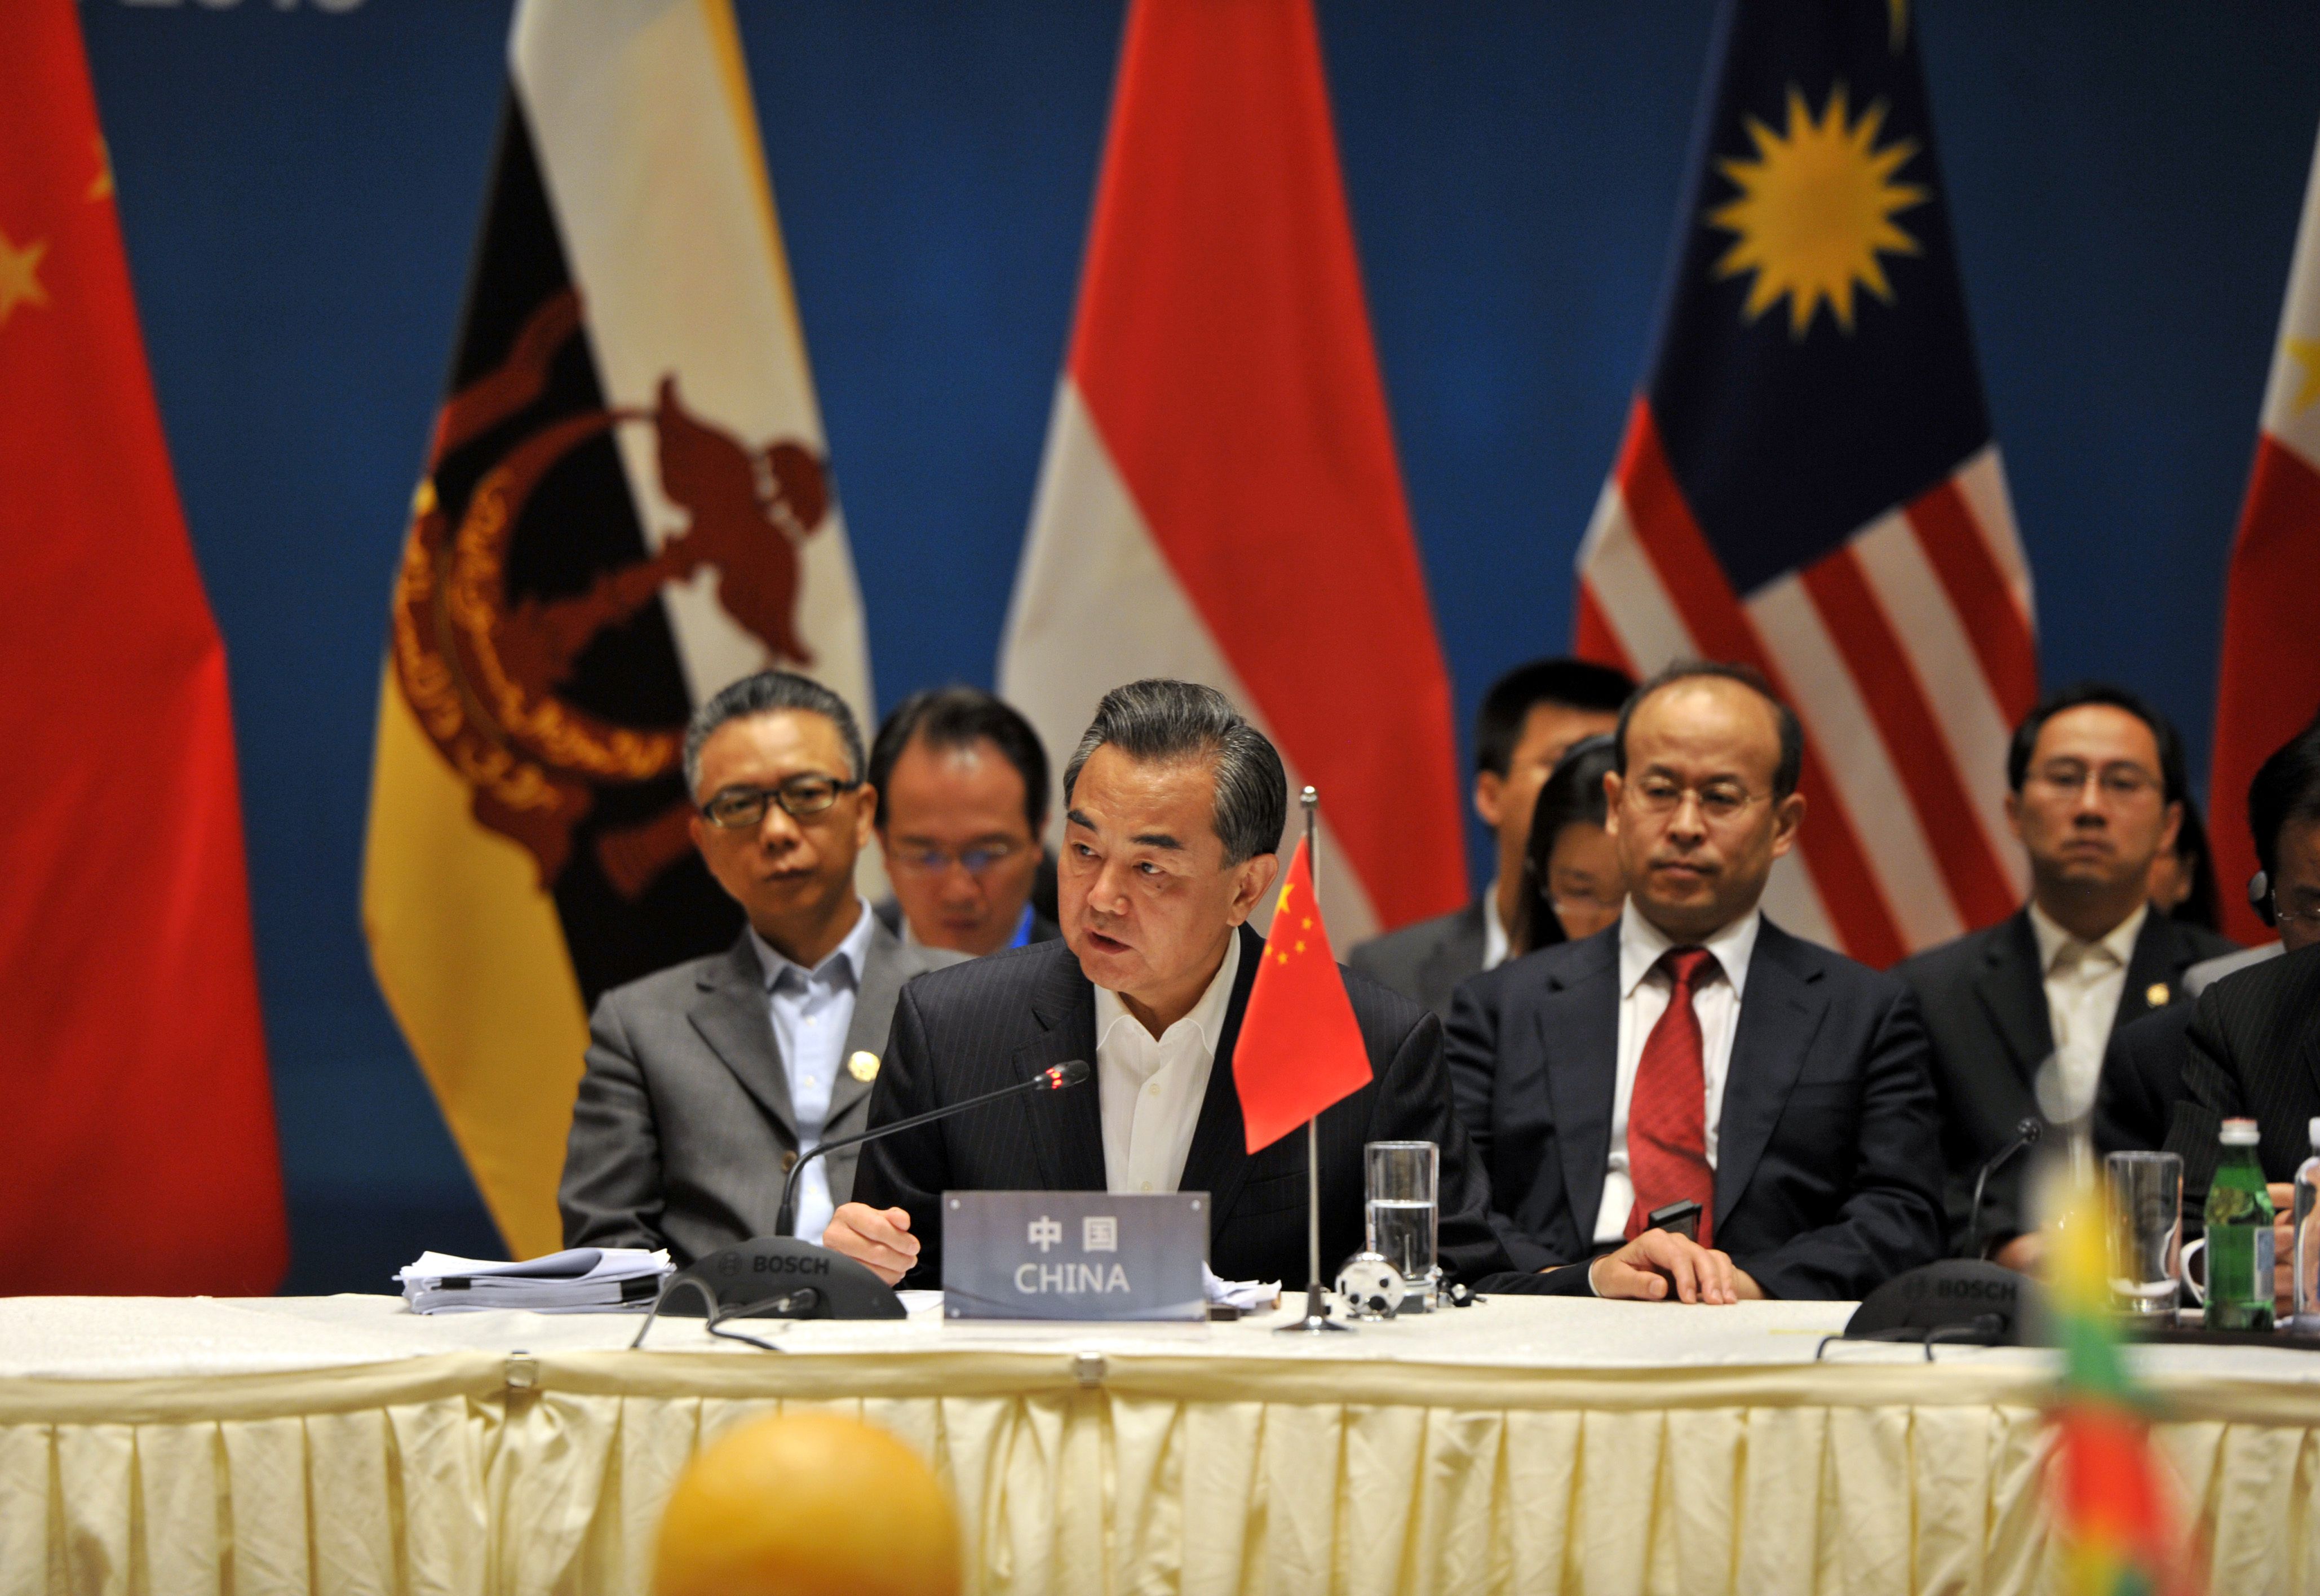 Chinese Foreign Minister Wang Yi (front) and foreign ministers from ASEAN members attend a special ASEAN-China meeting on Tuesday in Yuxi, China. | AFP-JIJI